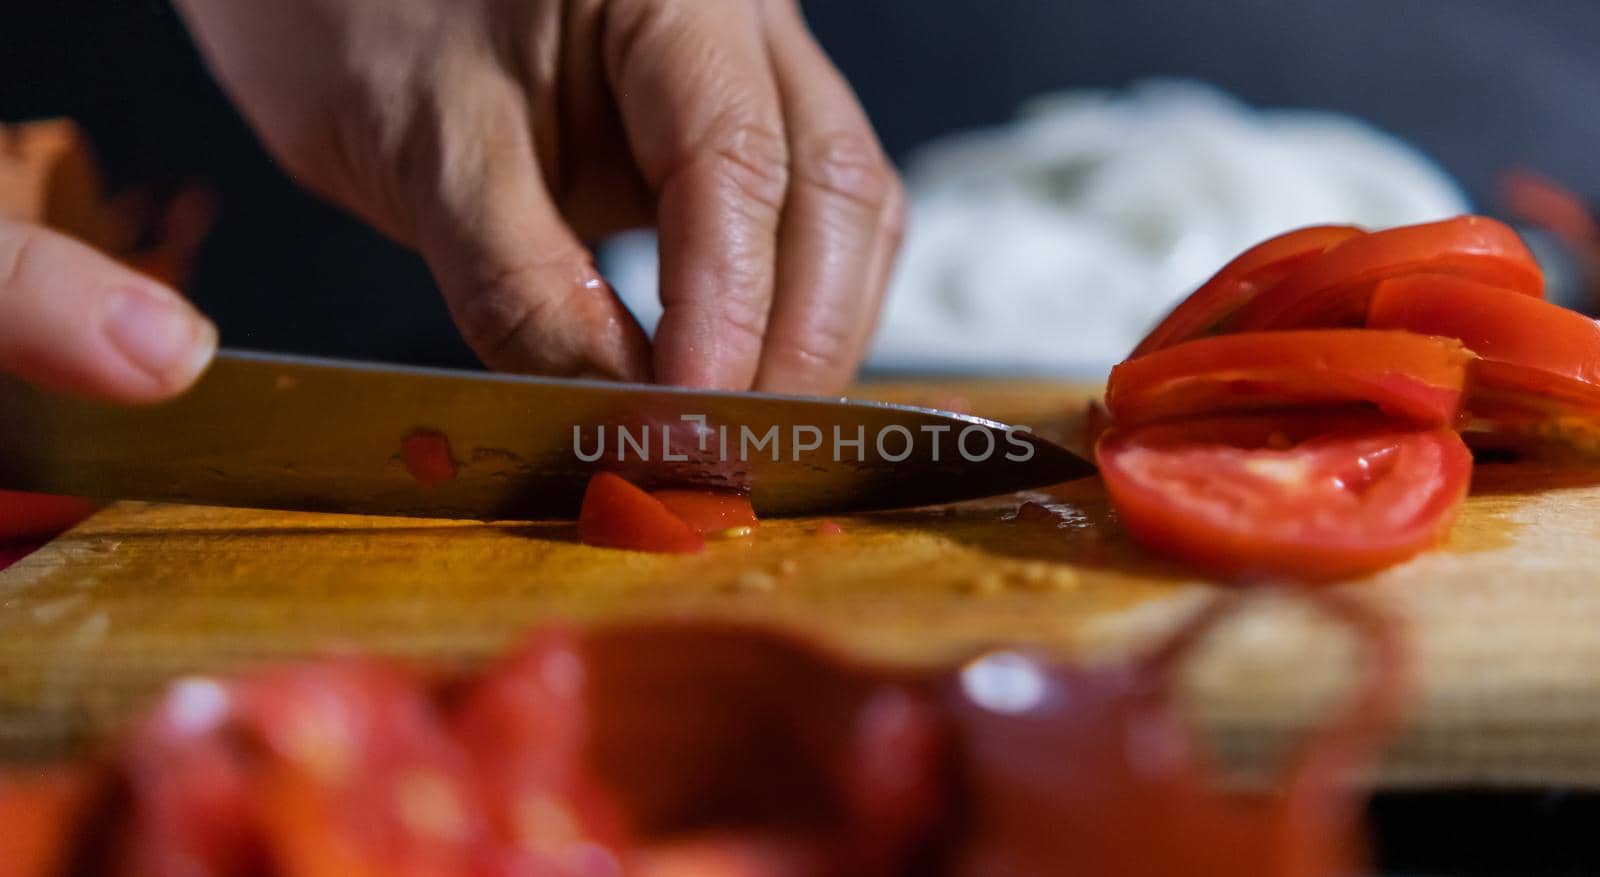 Close-up of hands firmly slicing tomato on wooden cutting board with blurry sliced onion as background. Person cutting fresh red vegetable with big knife above wooden surface. Healthy meal preparation